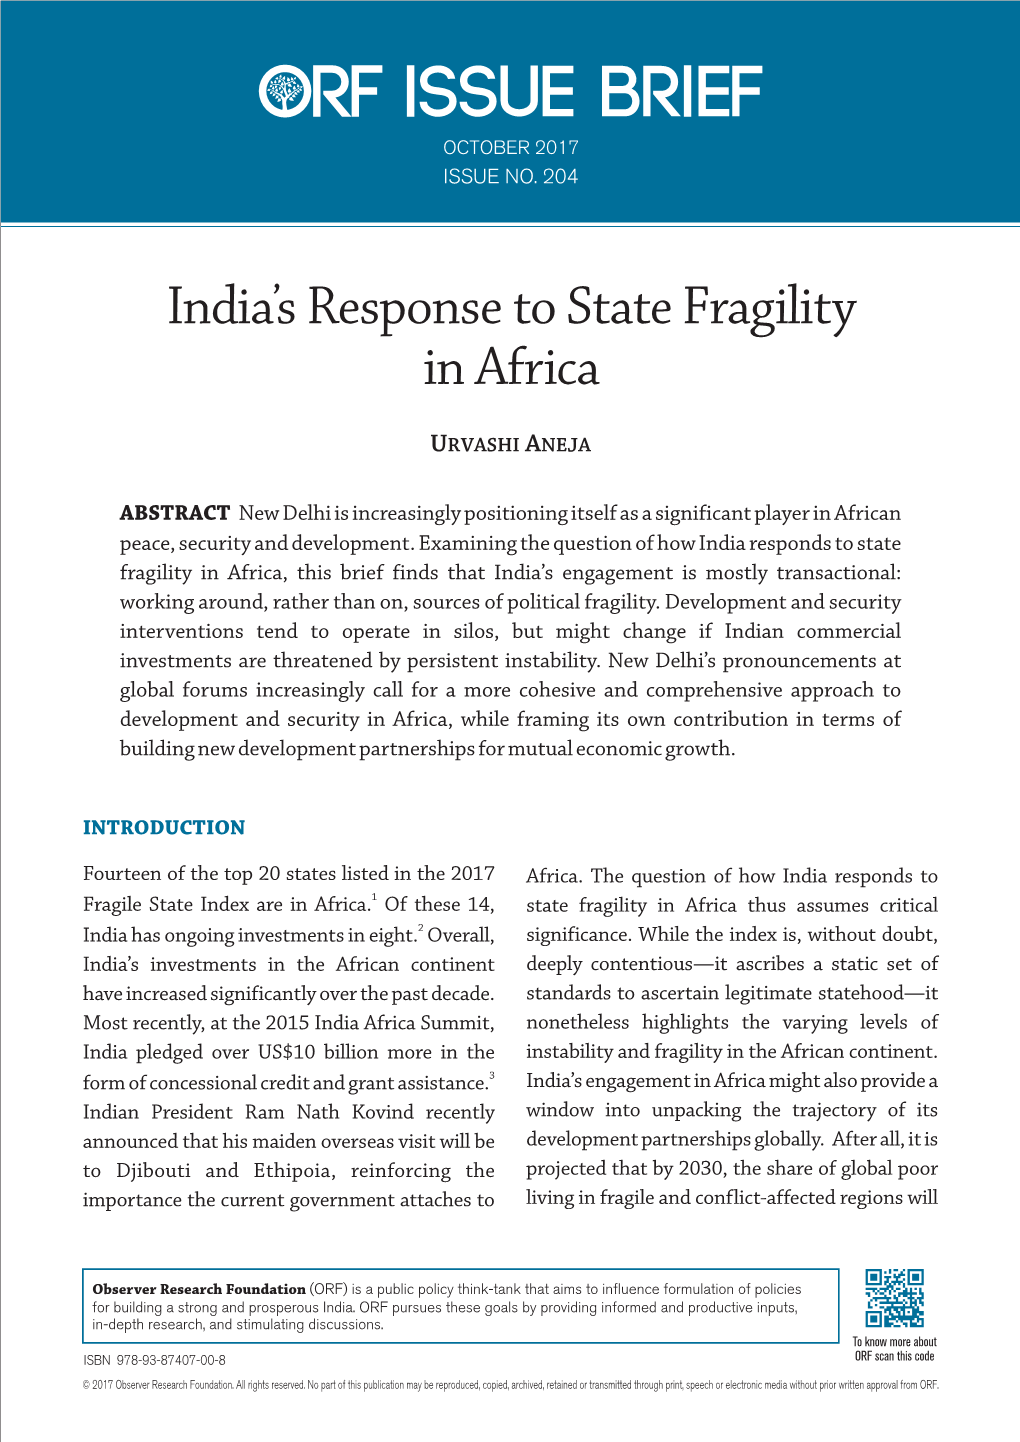 India's Response to State Fragility in Africa